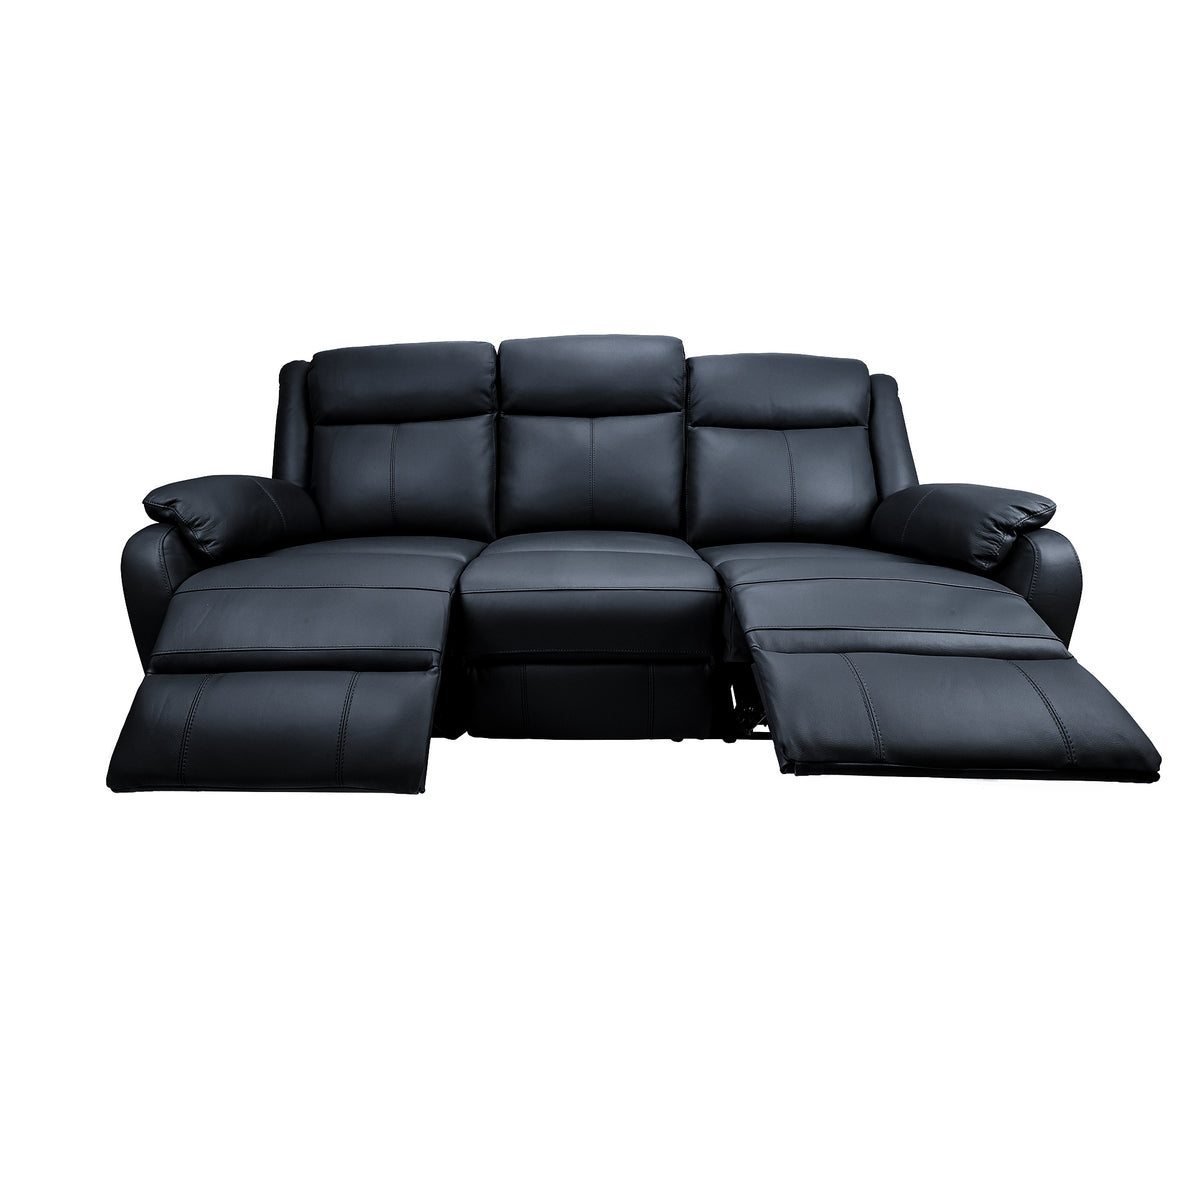 Bella 3+1+1 Seater Leather Electric Recliner Sofa Lounge Black 